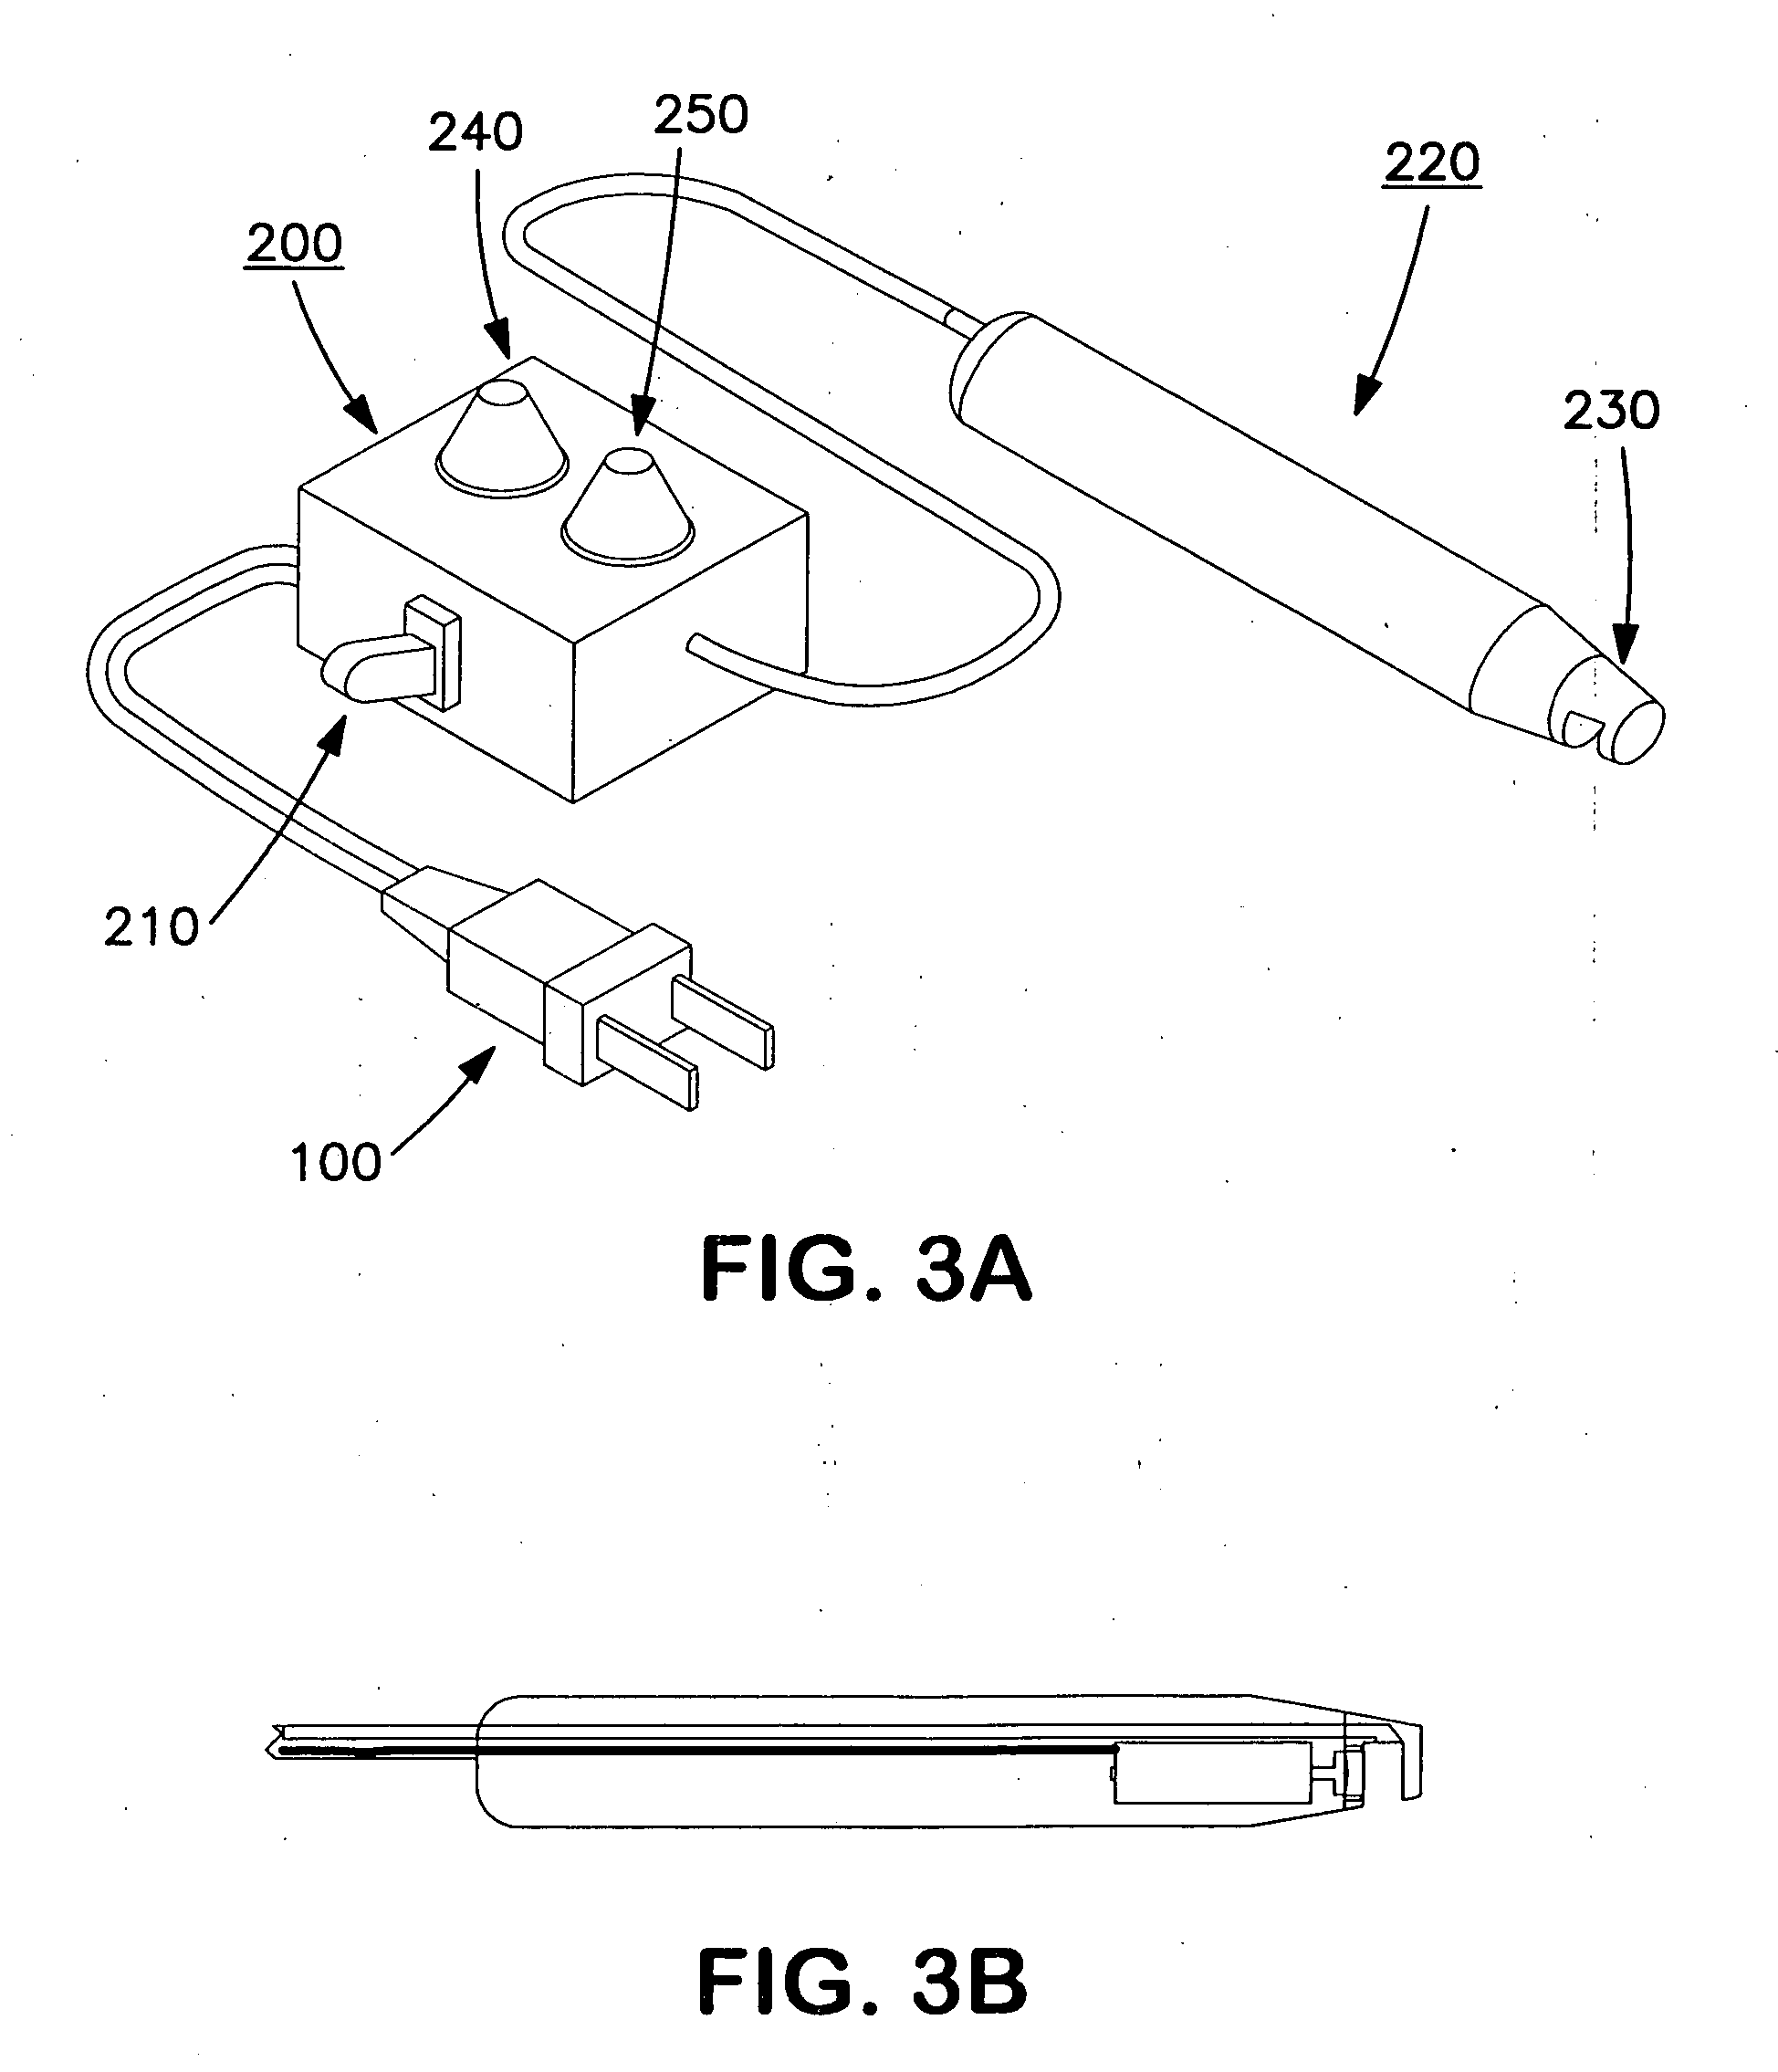 Method and apparatus for treating meibomian gland dysfunction